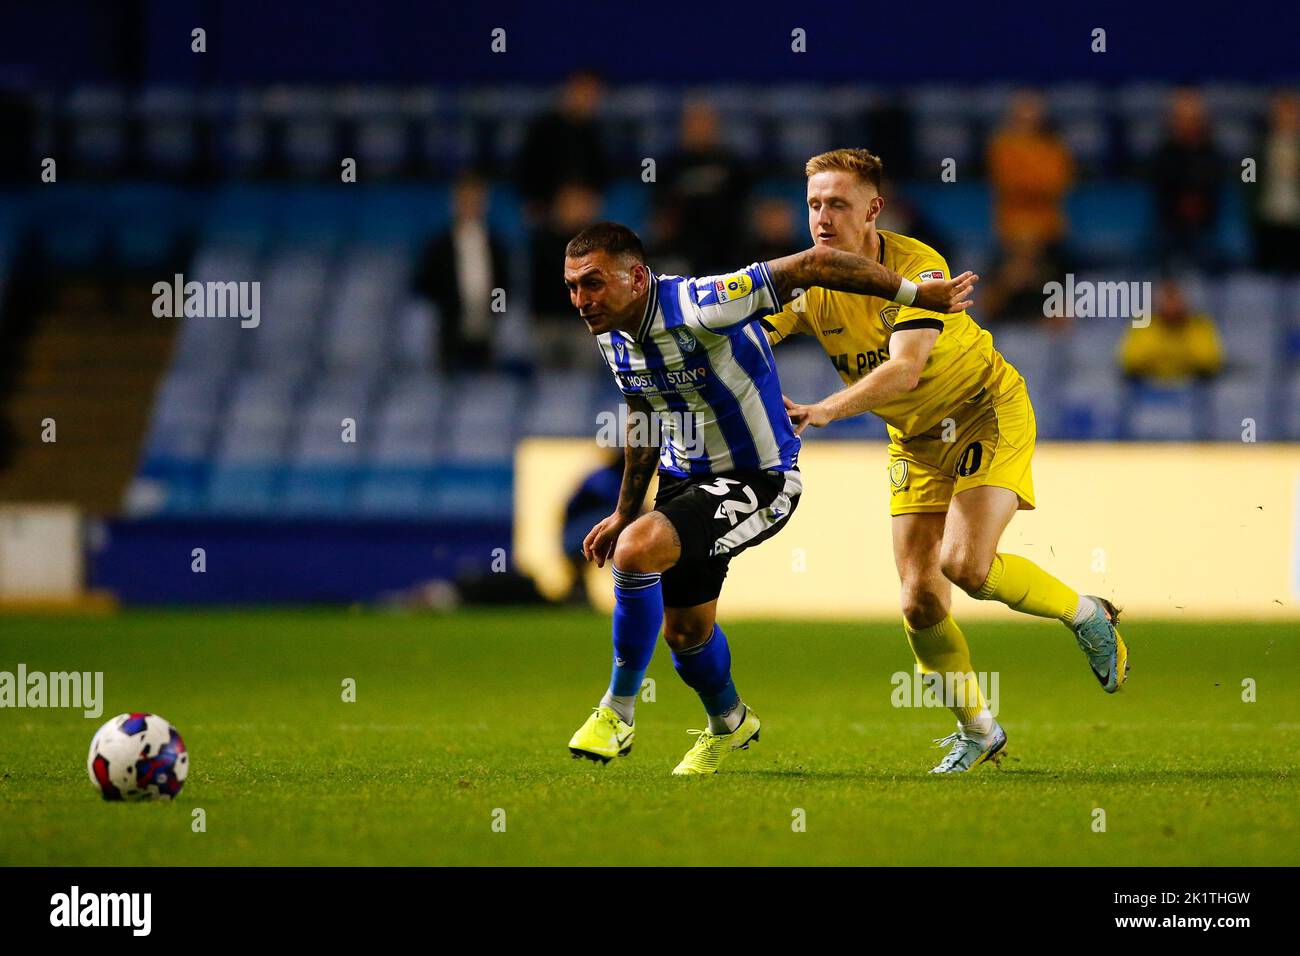 Jack Hunt #32 of Sheffield Wednesday and Davis Keillor-Dunn #10 of Burton Albion during the Papa John's Trophy match Sheffield Wednesday vs Burton Albion at Hillsborough, Sheffield, United Kingdom, 20th September 2022  (Photo by Ben Early/News Images) Stock Photo